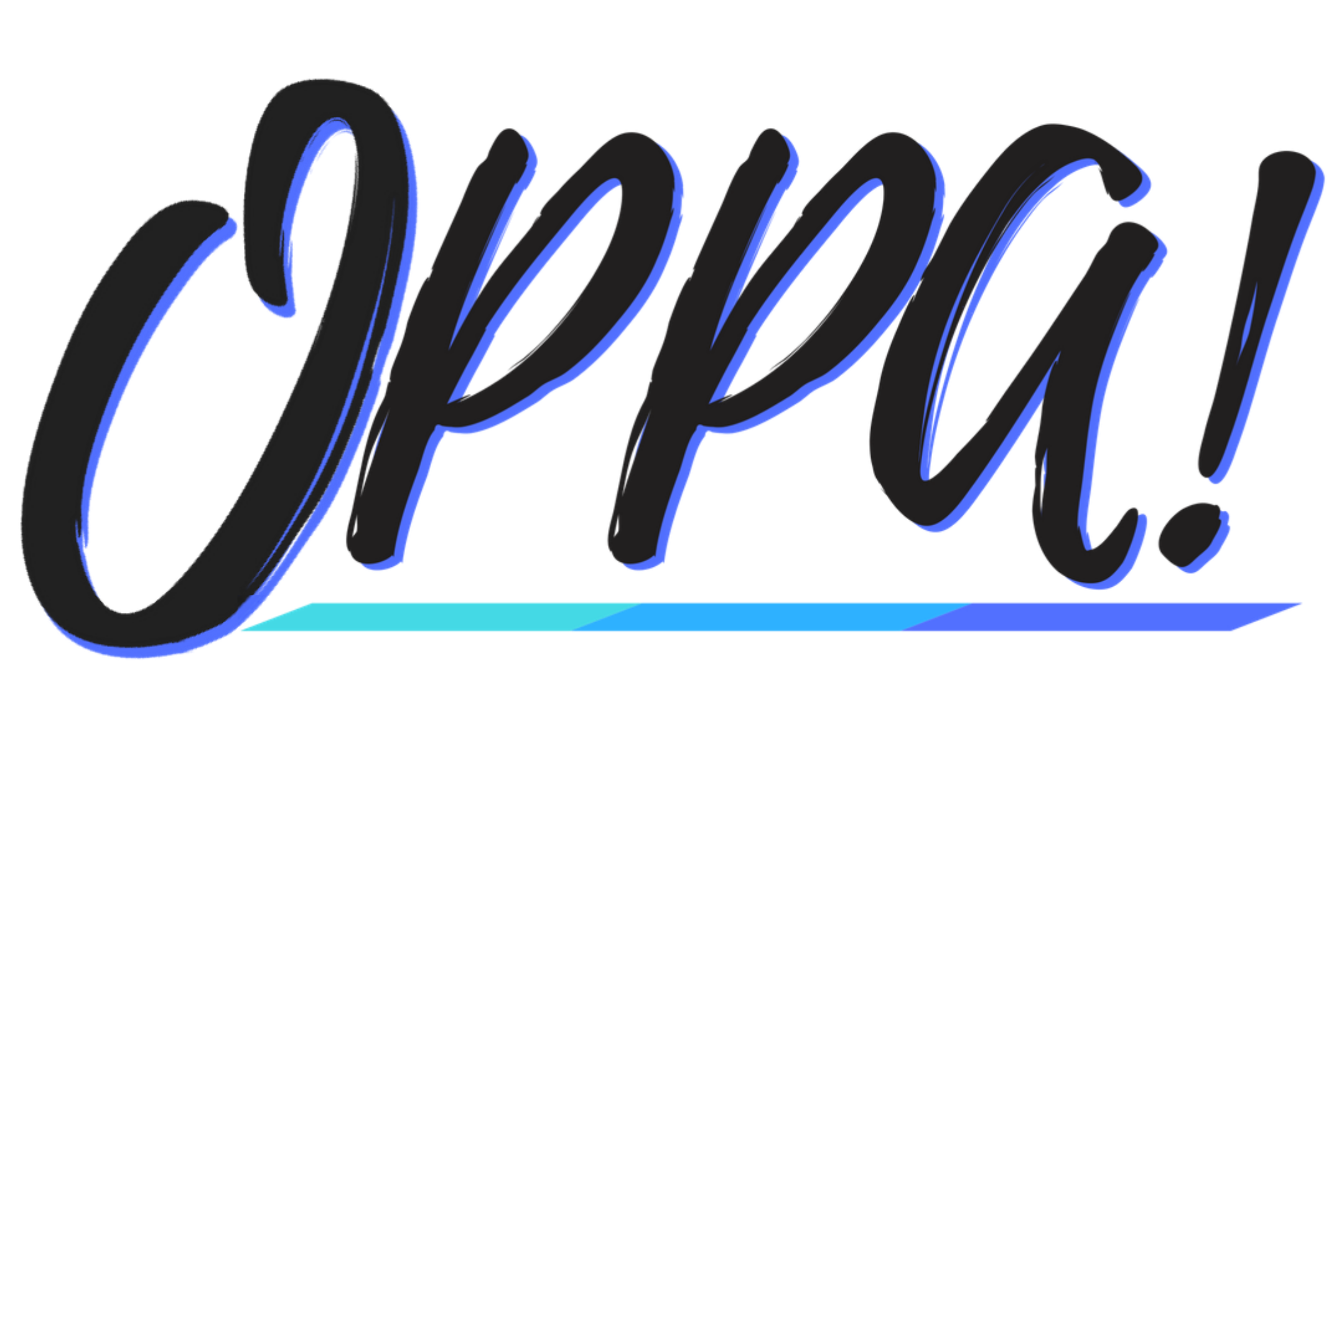 On Pitch Performing Arts